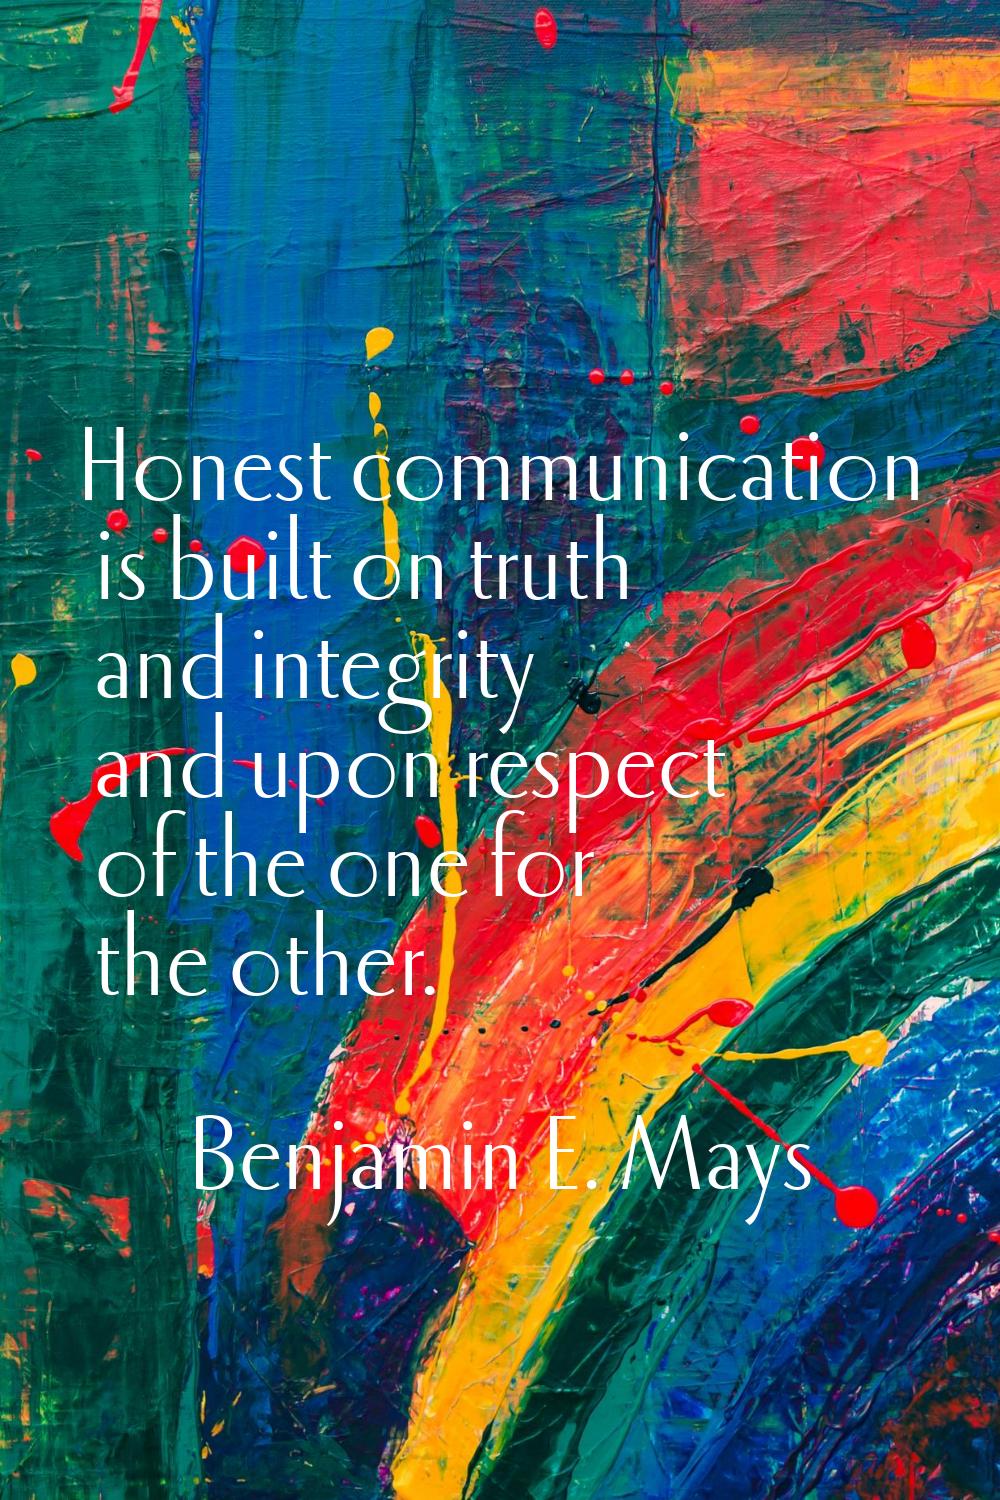 Honest communication is built on truth and integrity and upon respect of the one for the other.